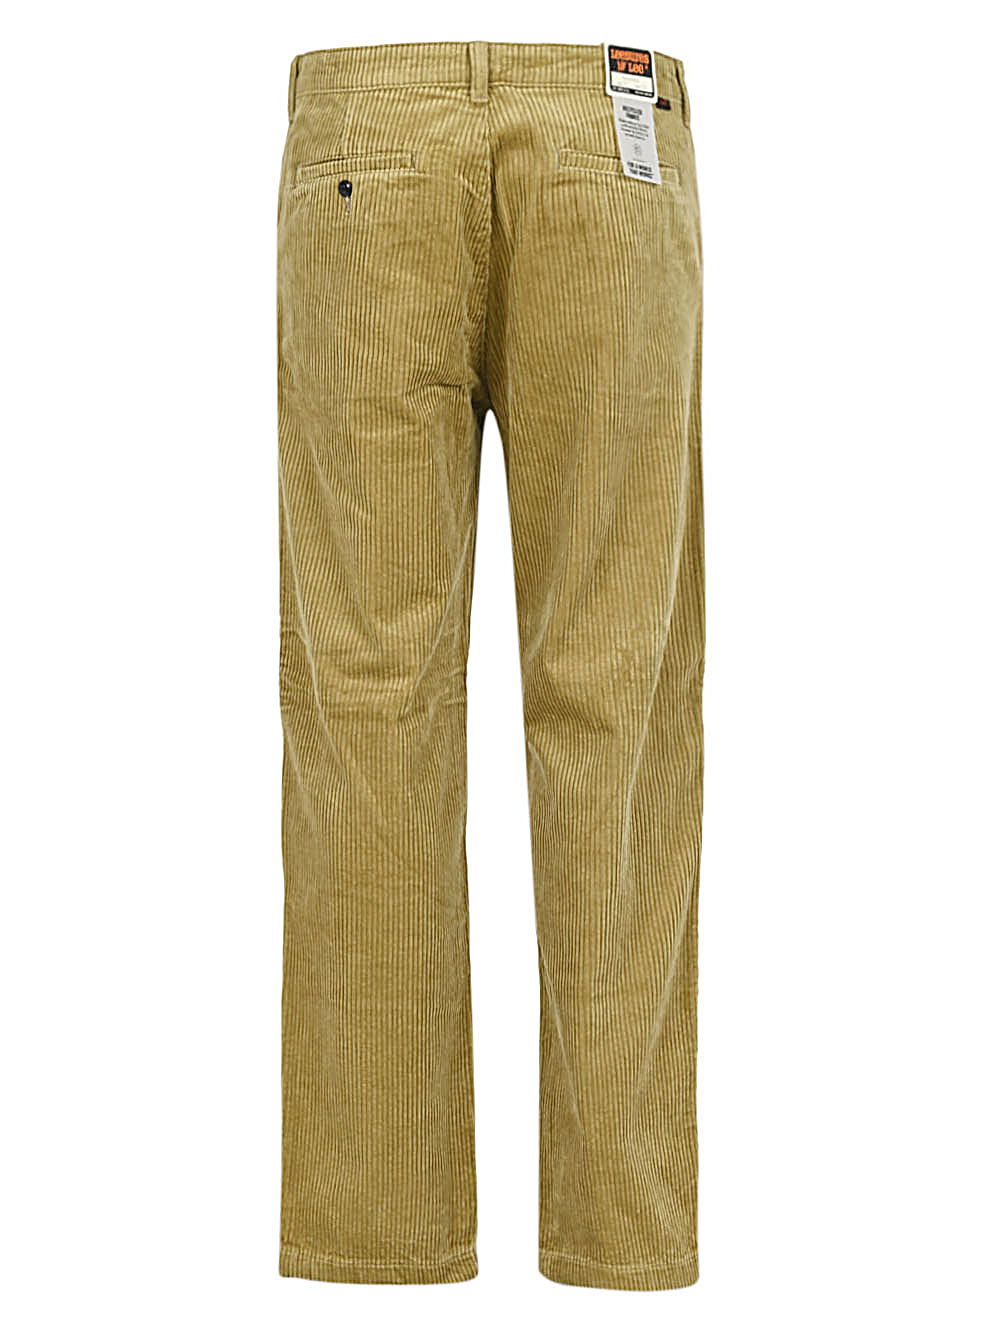 Lee Jeans LEE JEANS- Chino Trousers